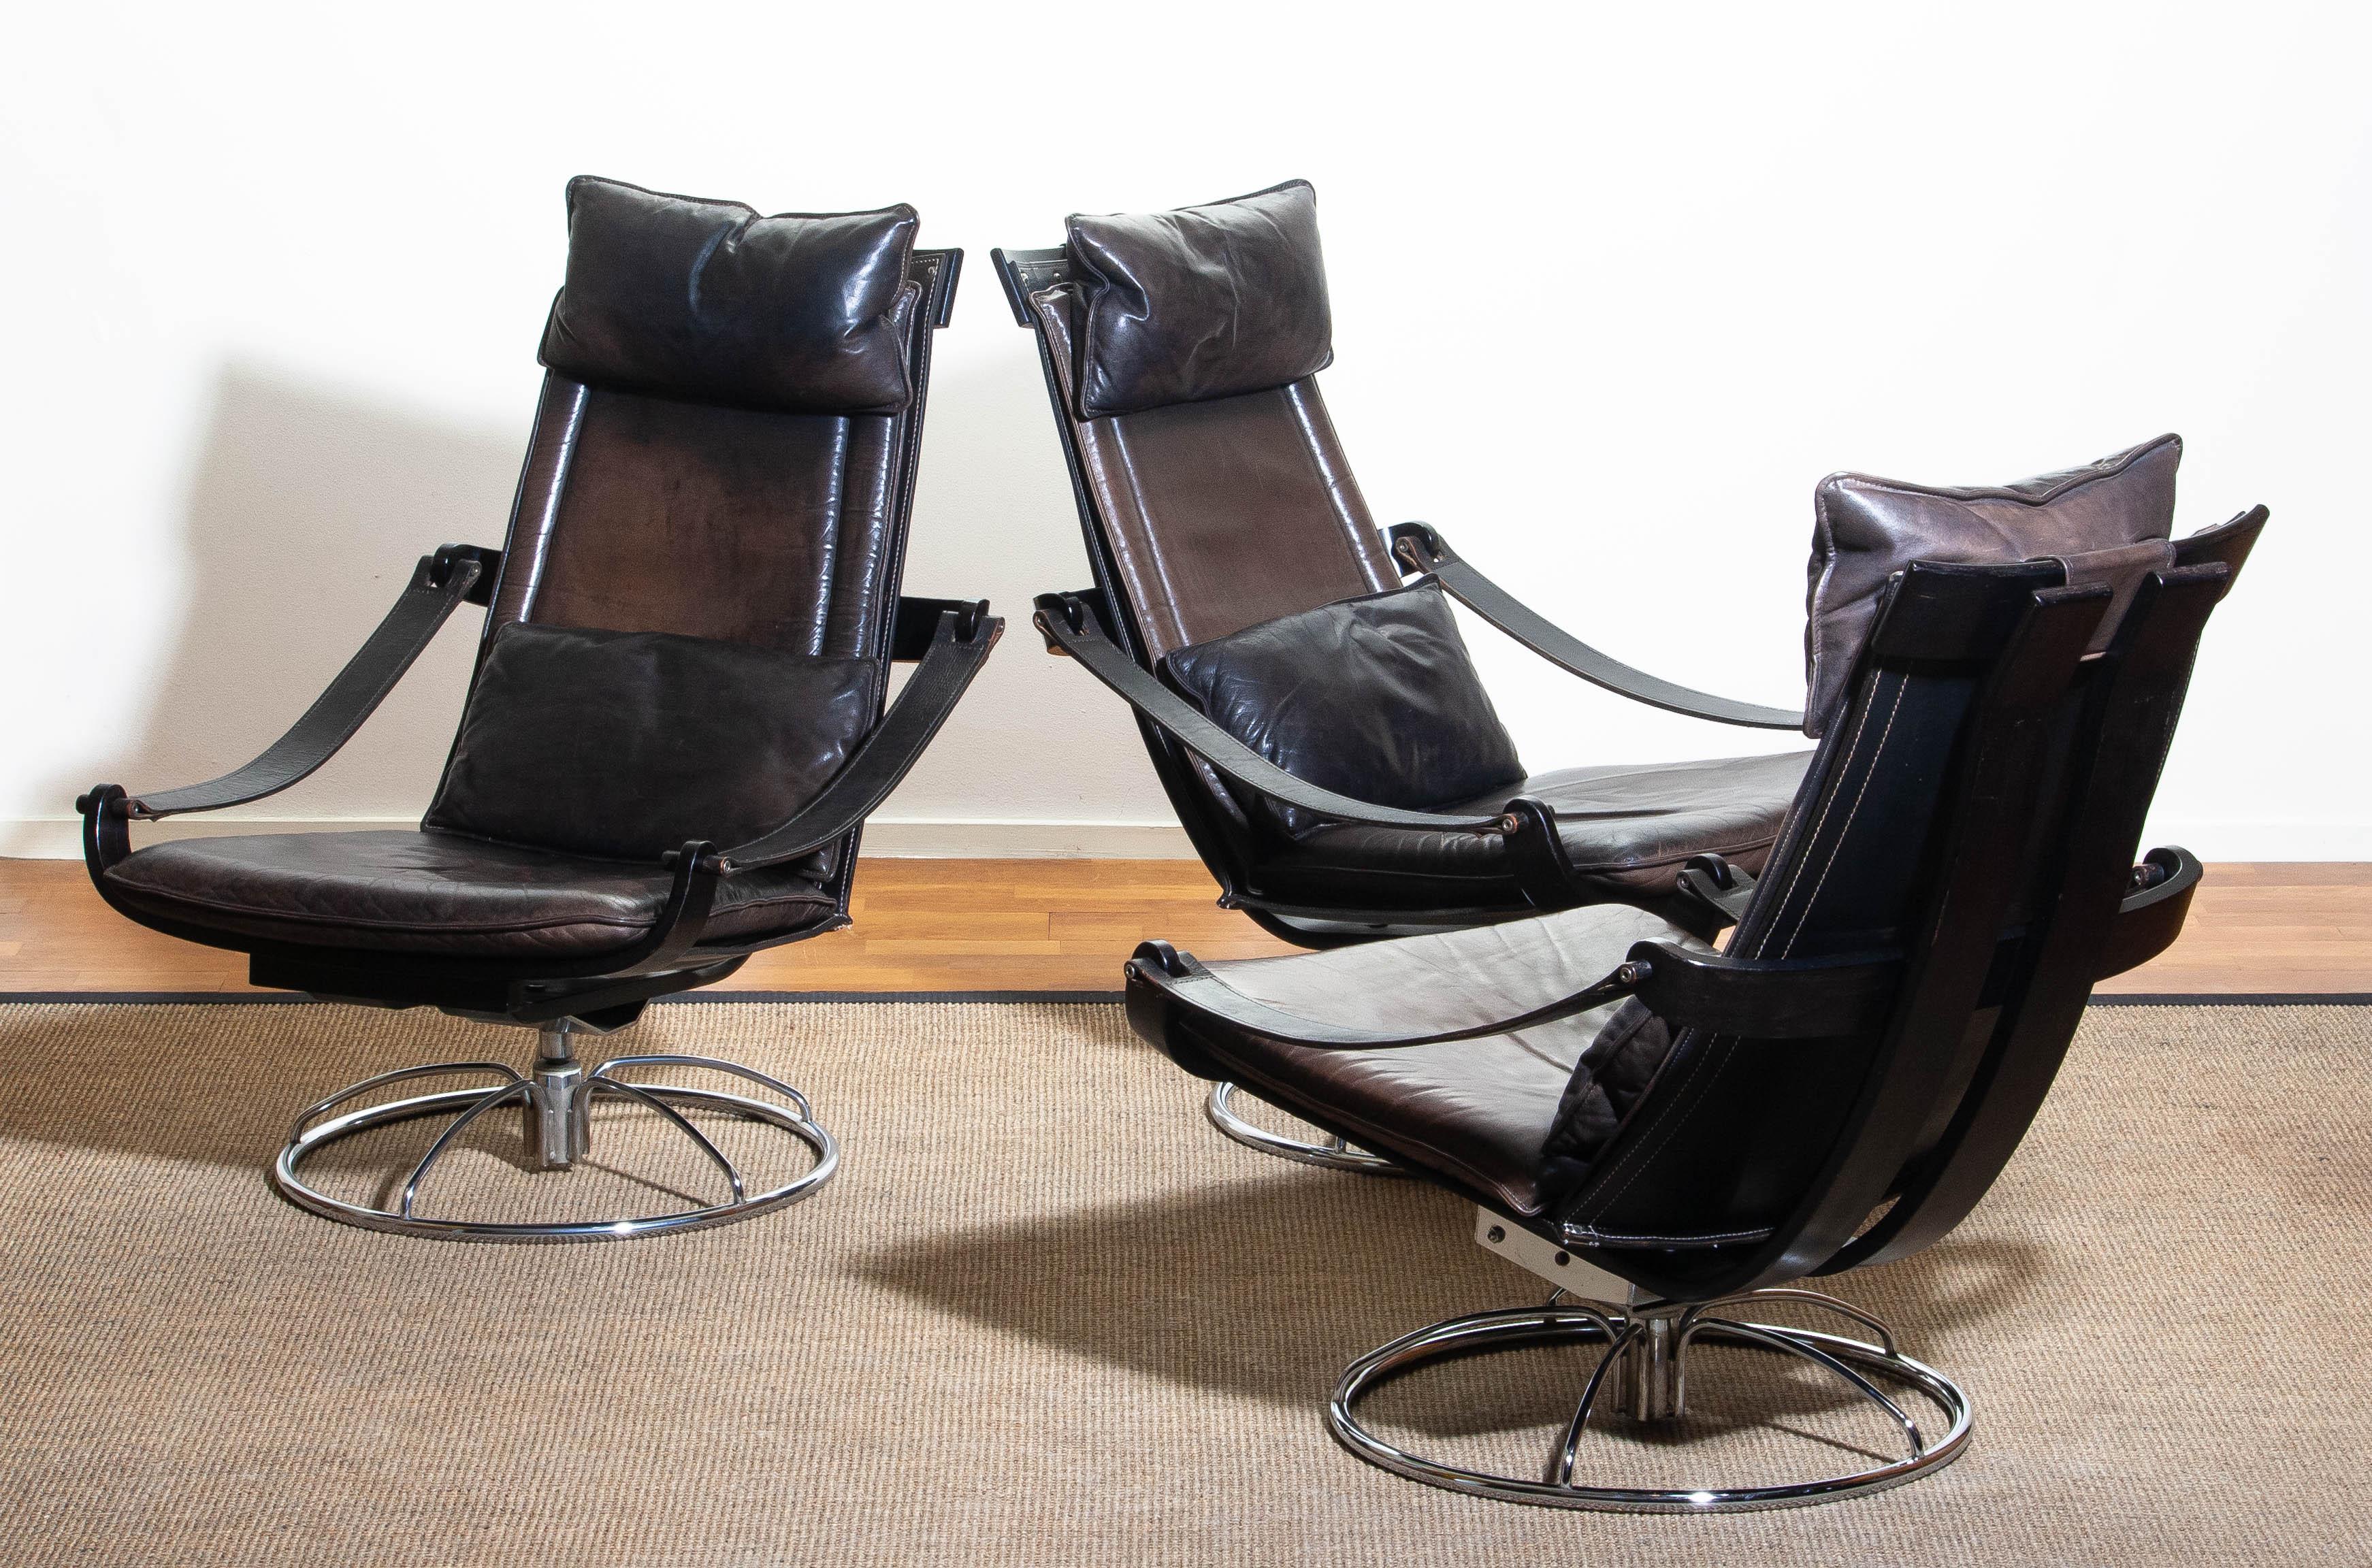 Extremely beautiful and artistic set of three swivel easy / lounge chairs designed by Åke Fribytter for Nelo Sweden.
These high quality chairs features a plywood frame and Brown leather cushions and a chromed metal base.
One chair has got an